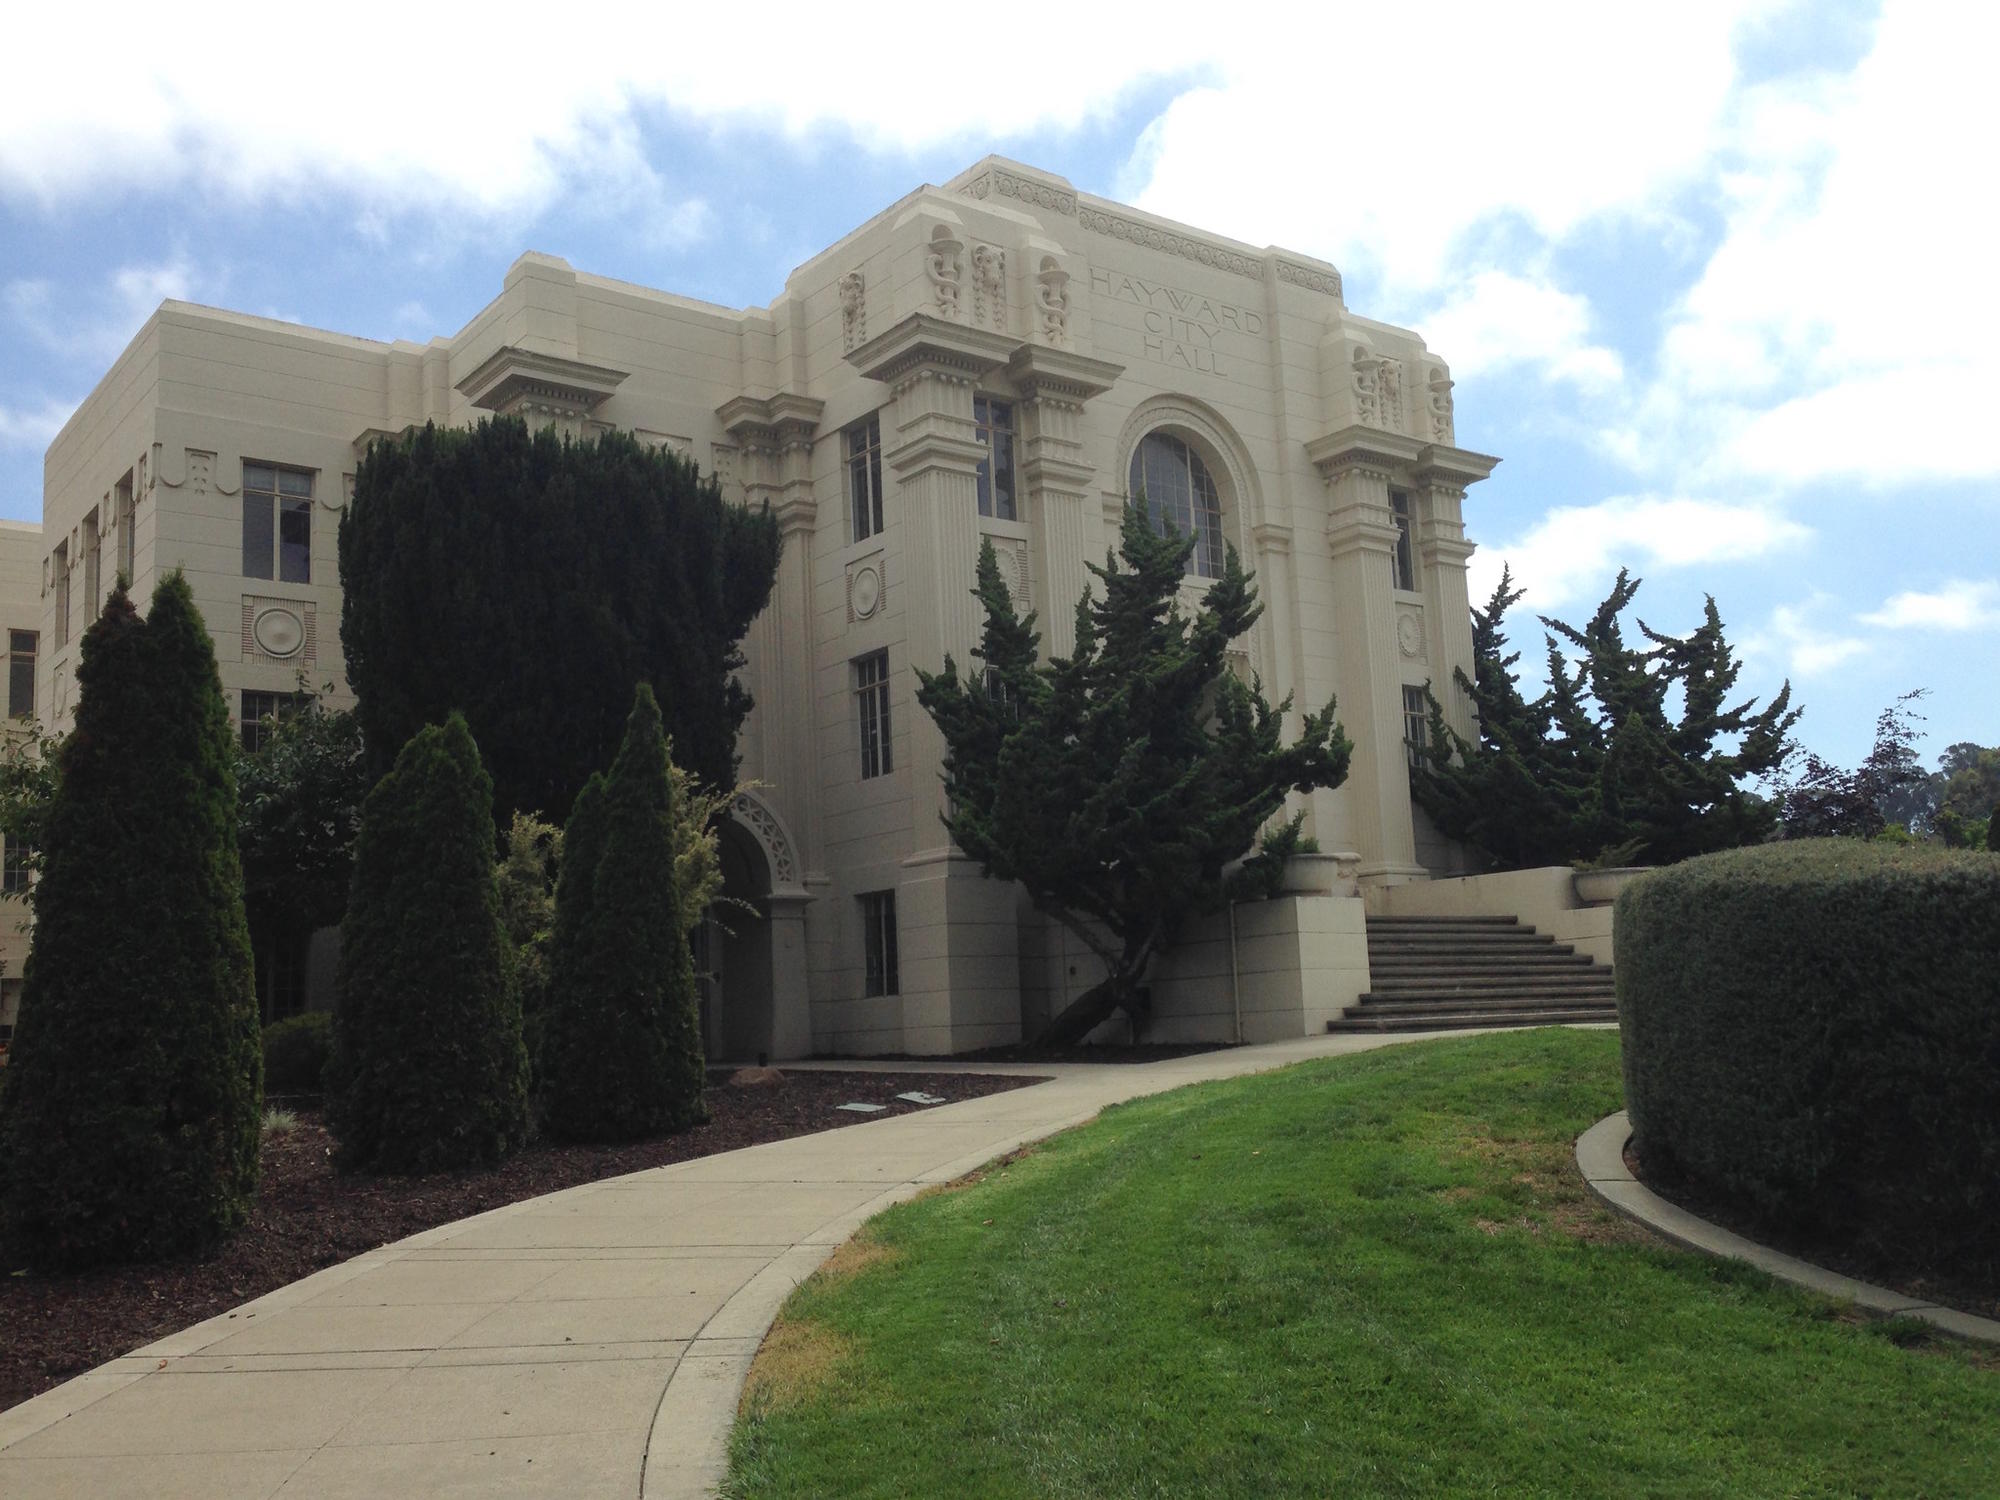 The historic Hayward City Hall was closed because it sits directly on top of the Hayward fault, which is pulling the building apart.